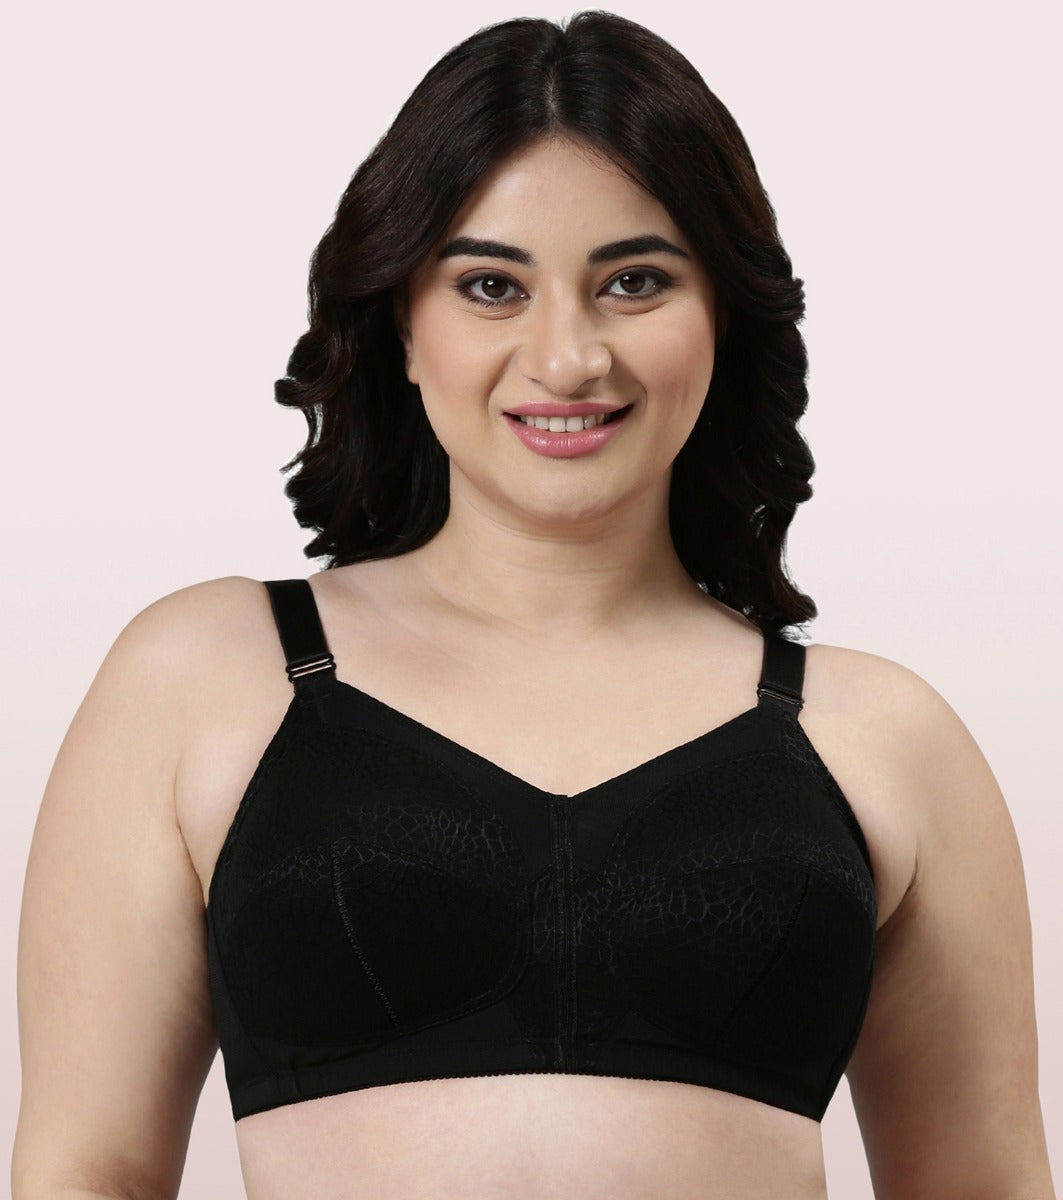 Enamor Body Transform F096 Ultimate Curve Support Bra for Women- Full Coverage, Non Padded and Wirefree - Black